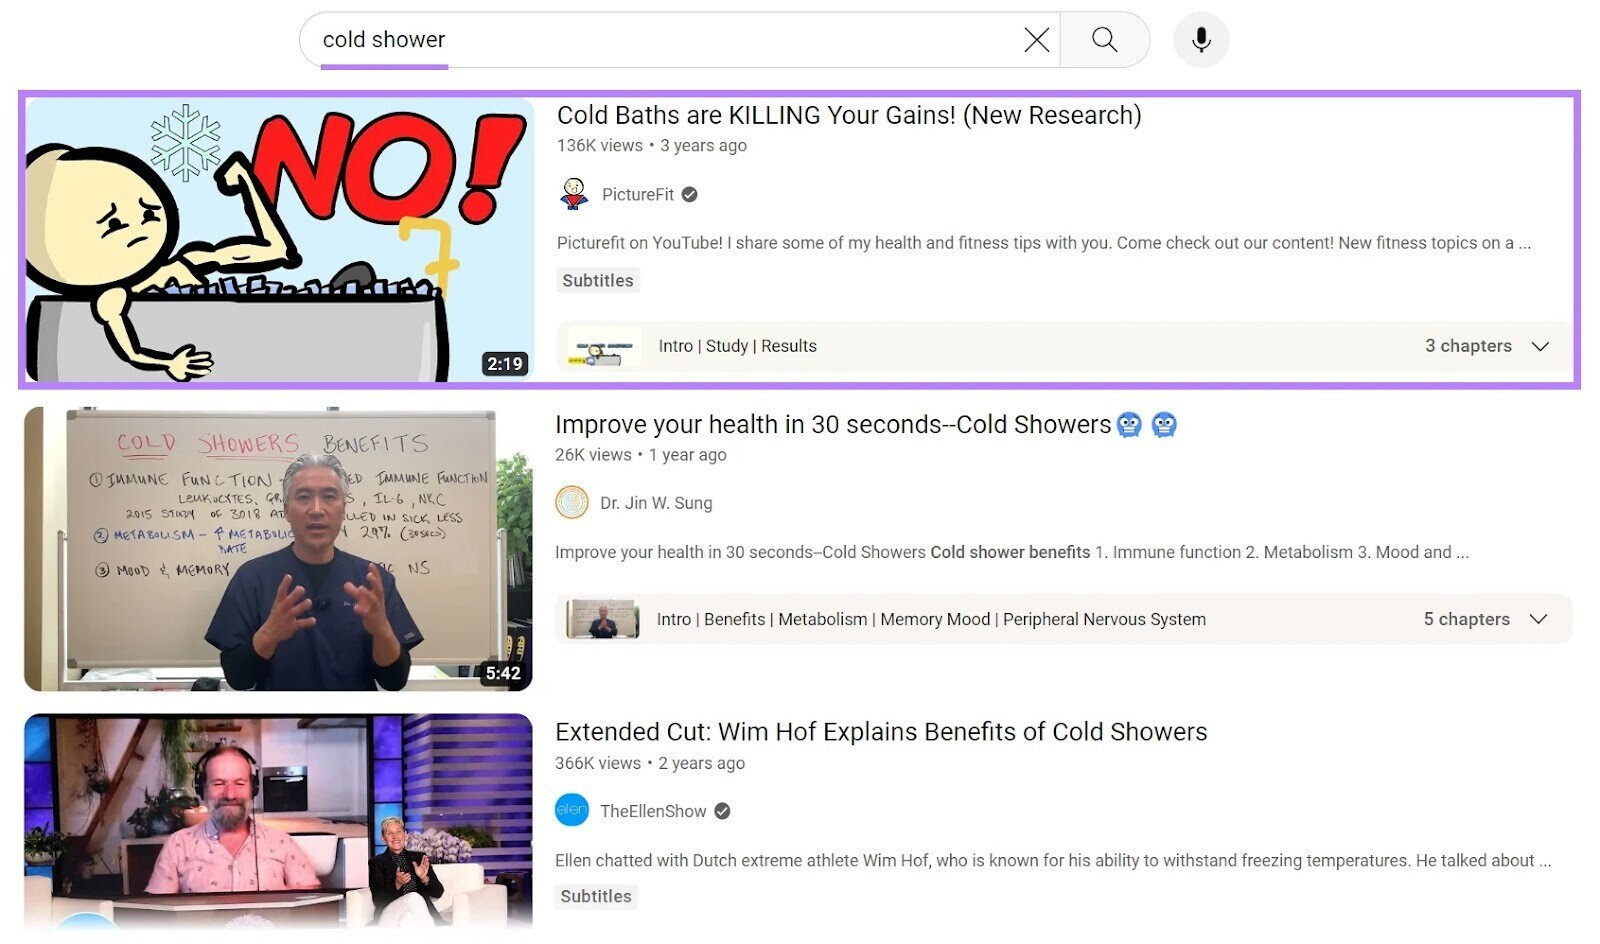 YouTube search results for the query "cold shower"